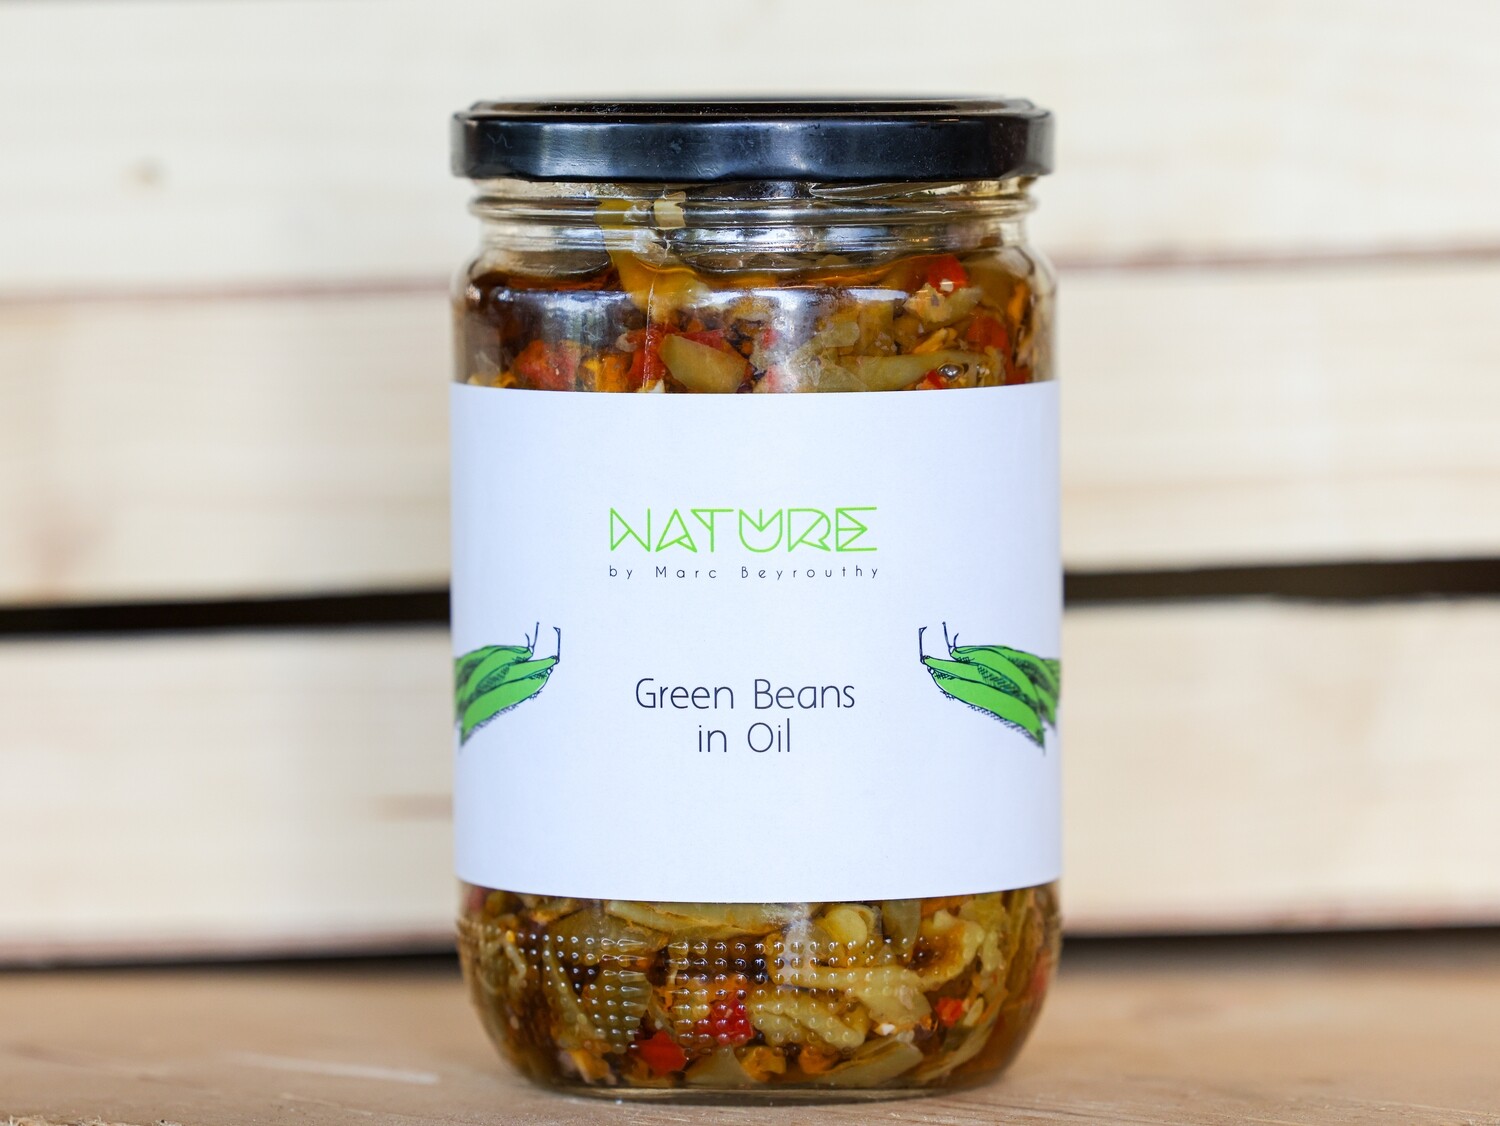 Green Beans in Oil (Jar) - Nature by Marc Beyrouthy